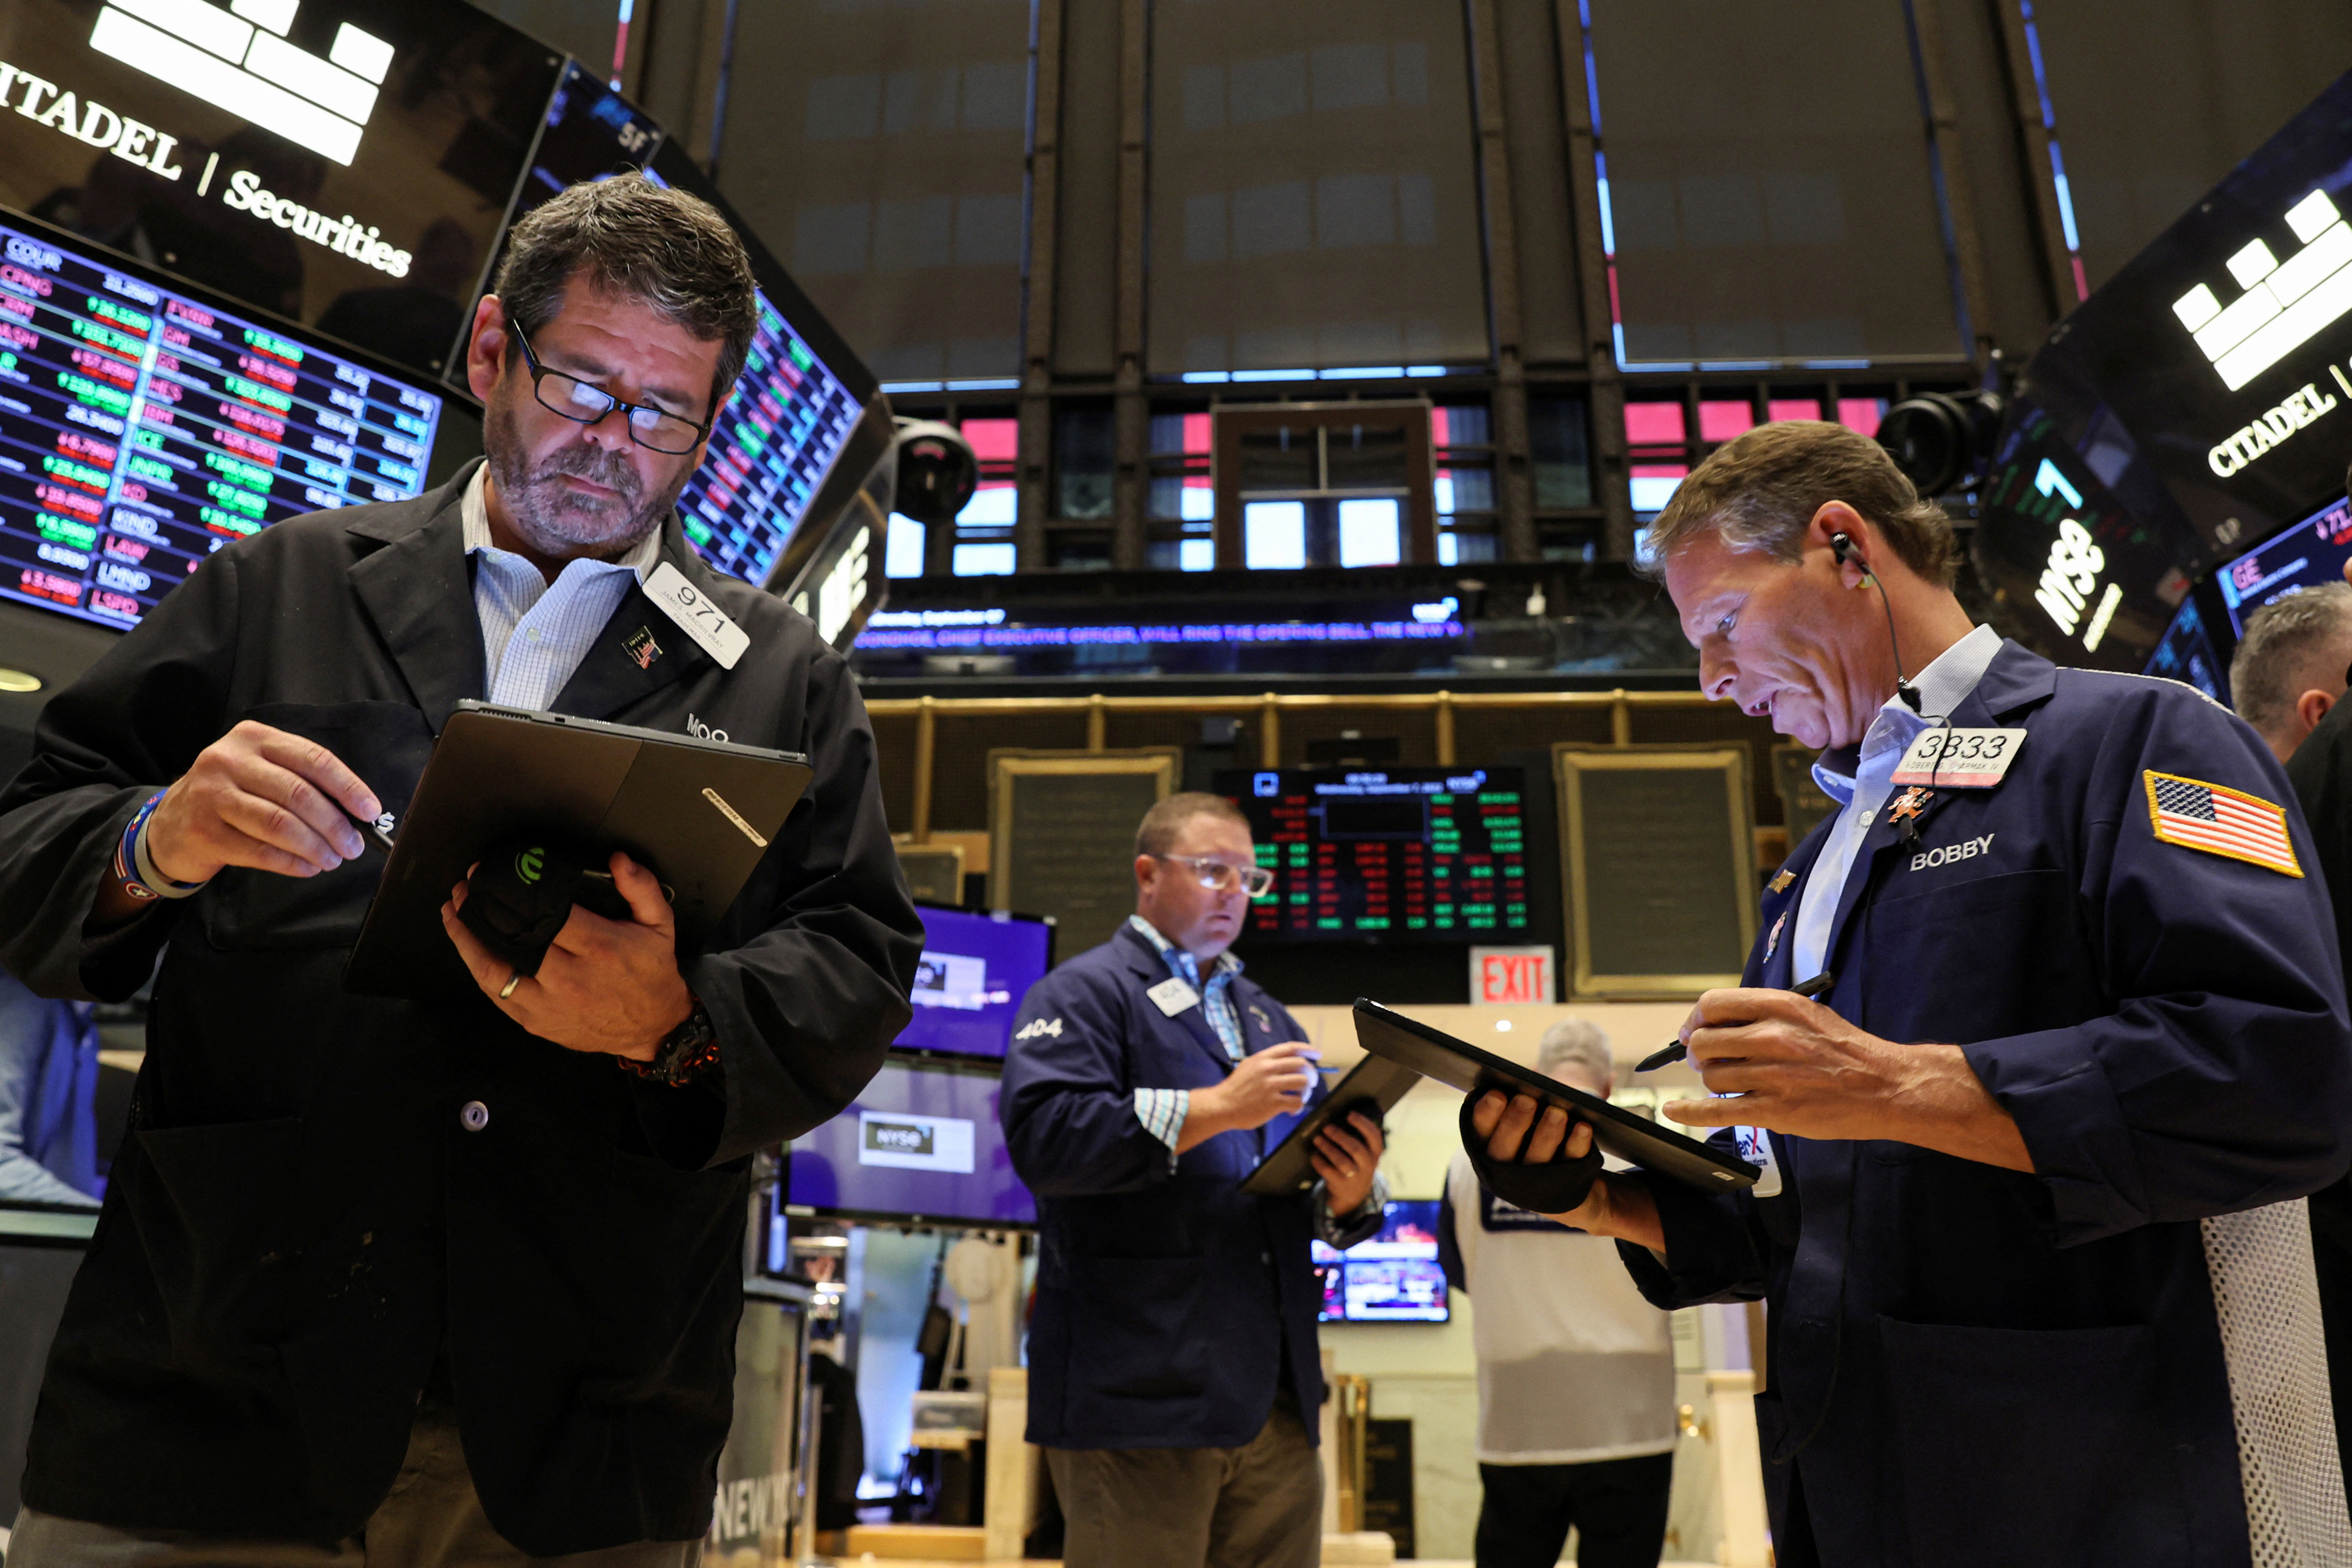 Traders work on the floor of the New York Stock Exchange in New York